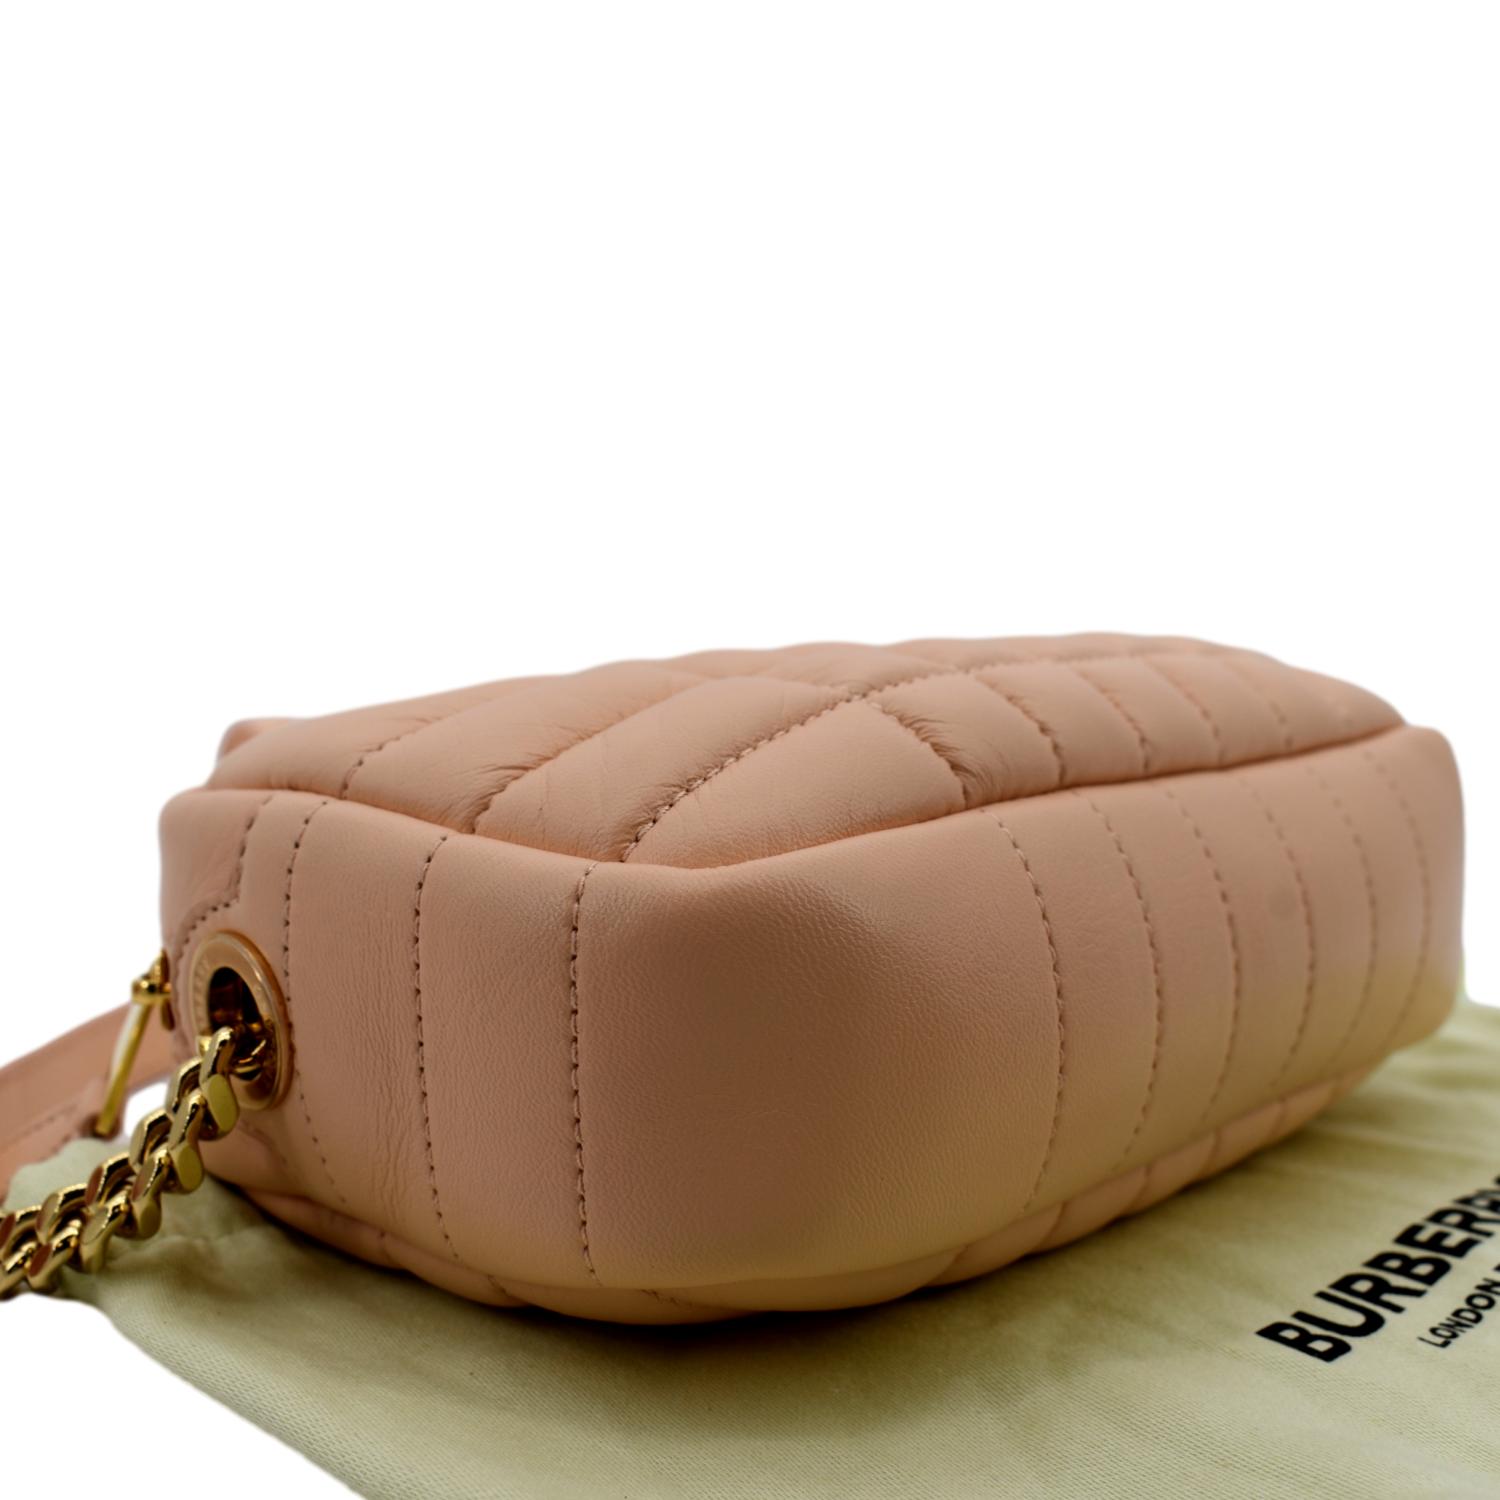 Burberry Lola Quilted Camera Bag